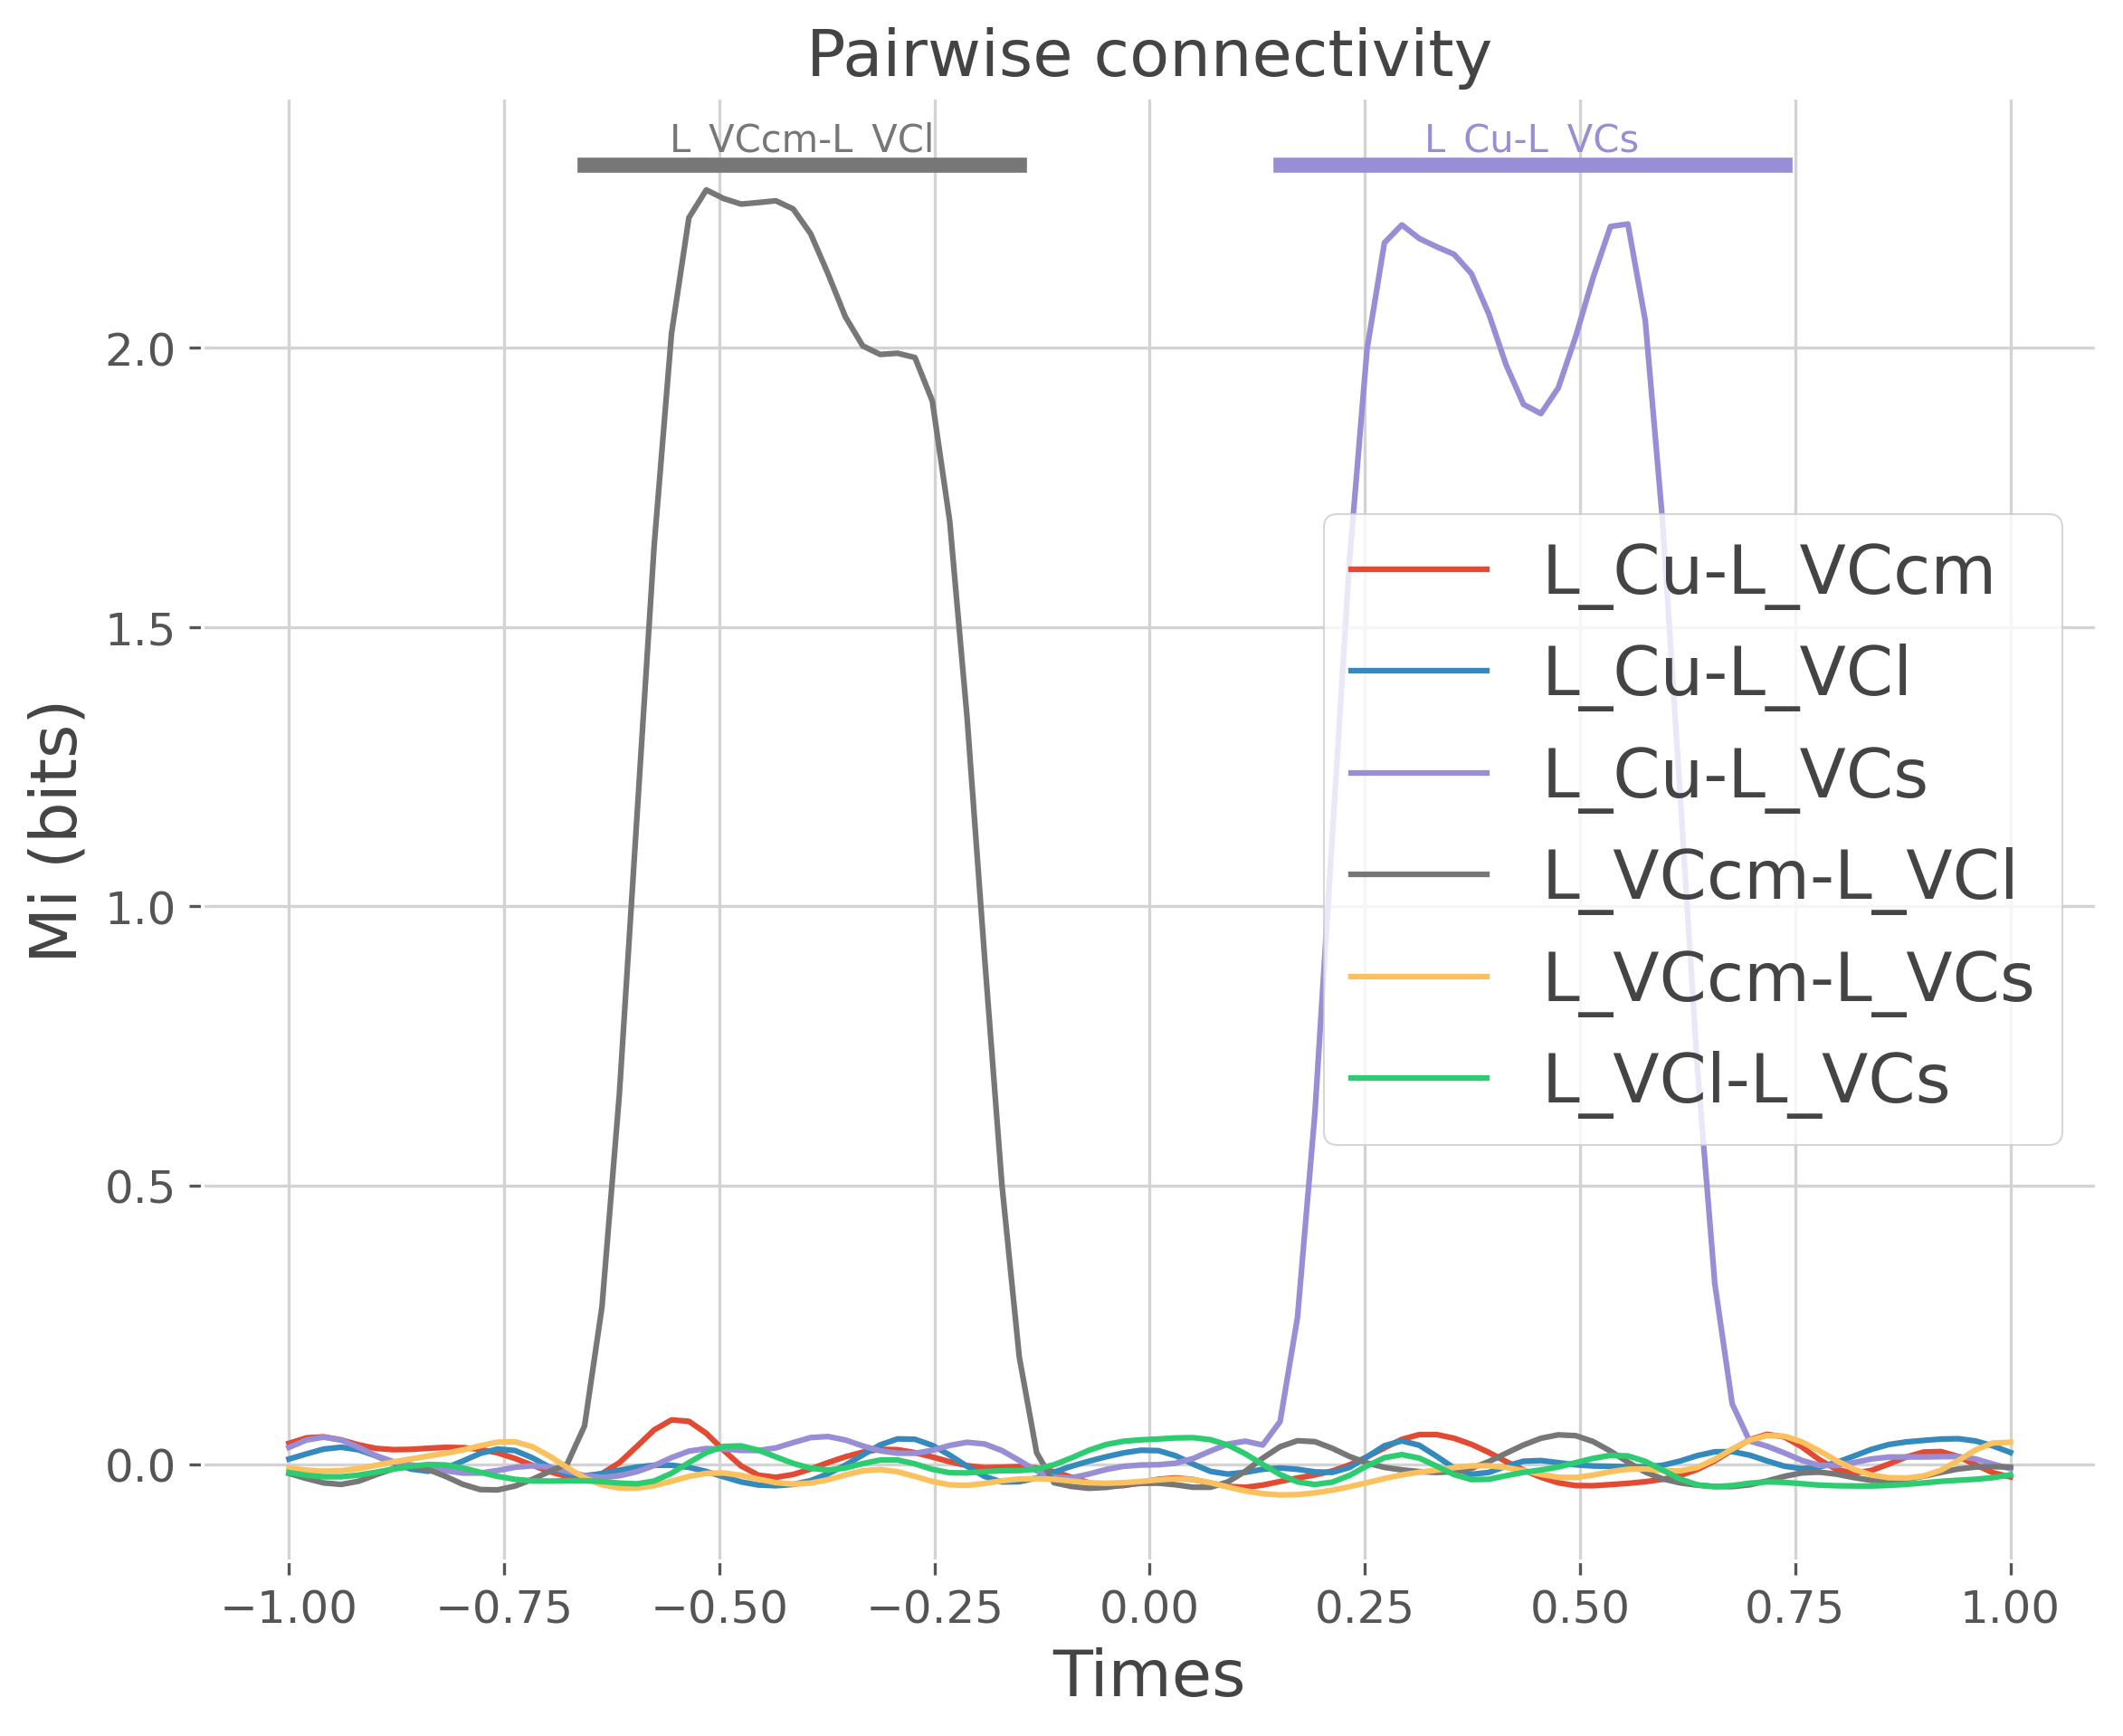 Pairwise connectivity